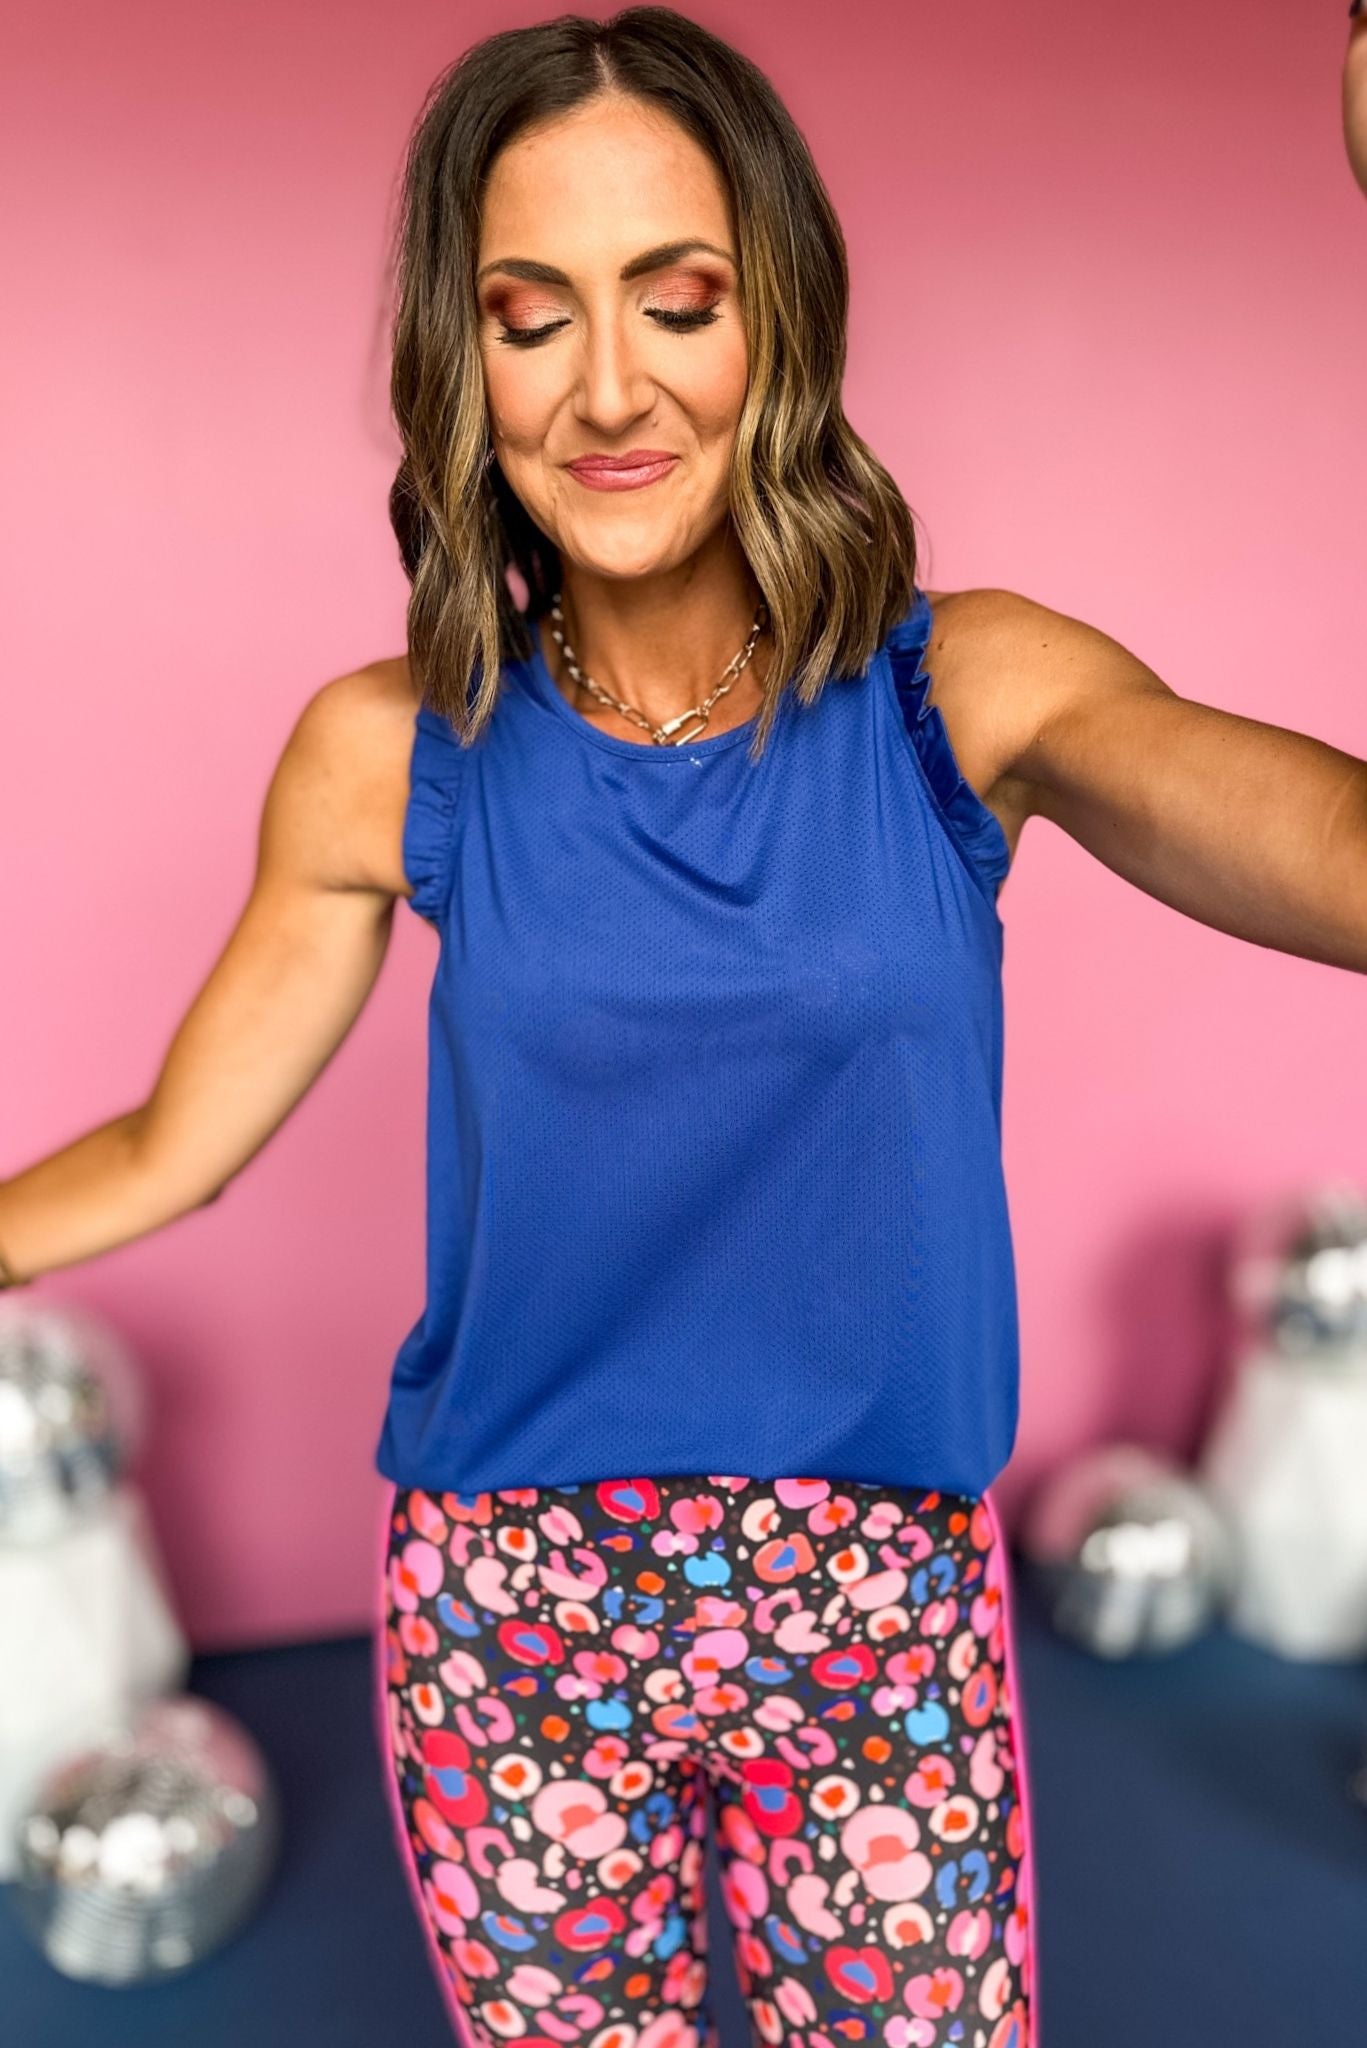 SSYS Royal Blue Ruffle Racerback Active Tank Top, must have top, must have athleisure, elevated style, elevated athleisure, mom style, active style, active wear, fall athleisure, fall style, comfortable style, elevated comfort, shop style your senses by mallory fitzsimmons